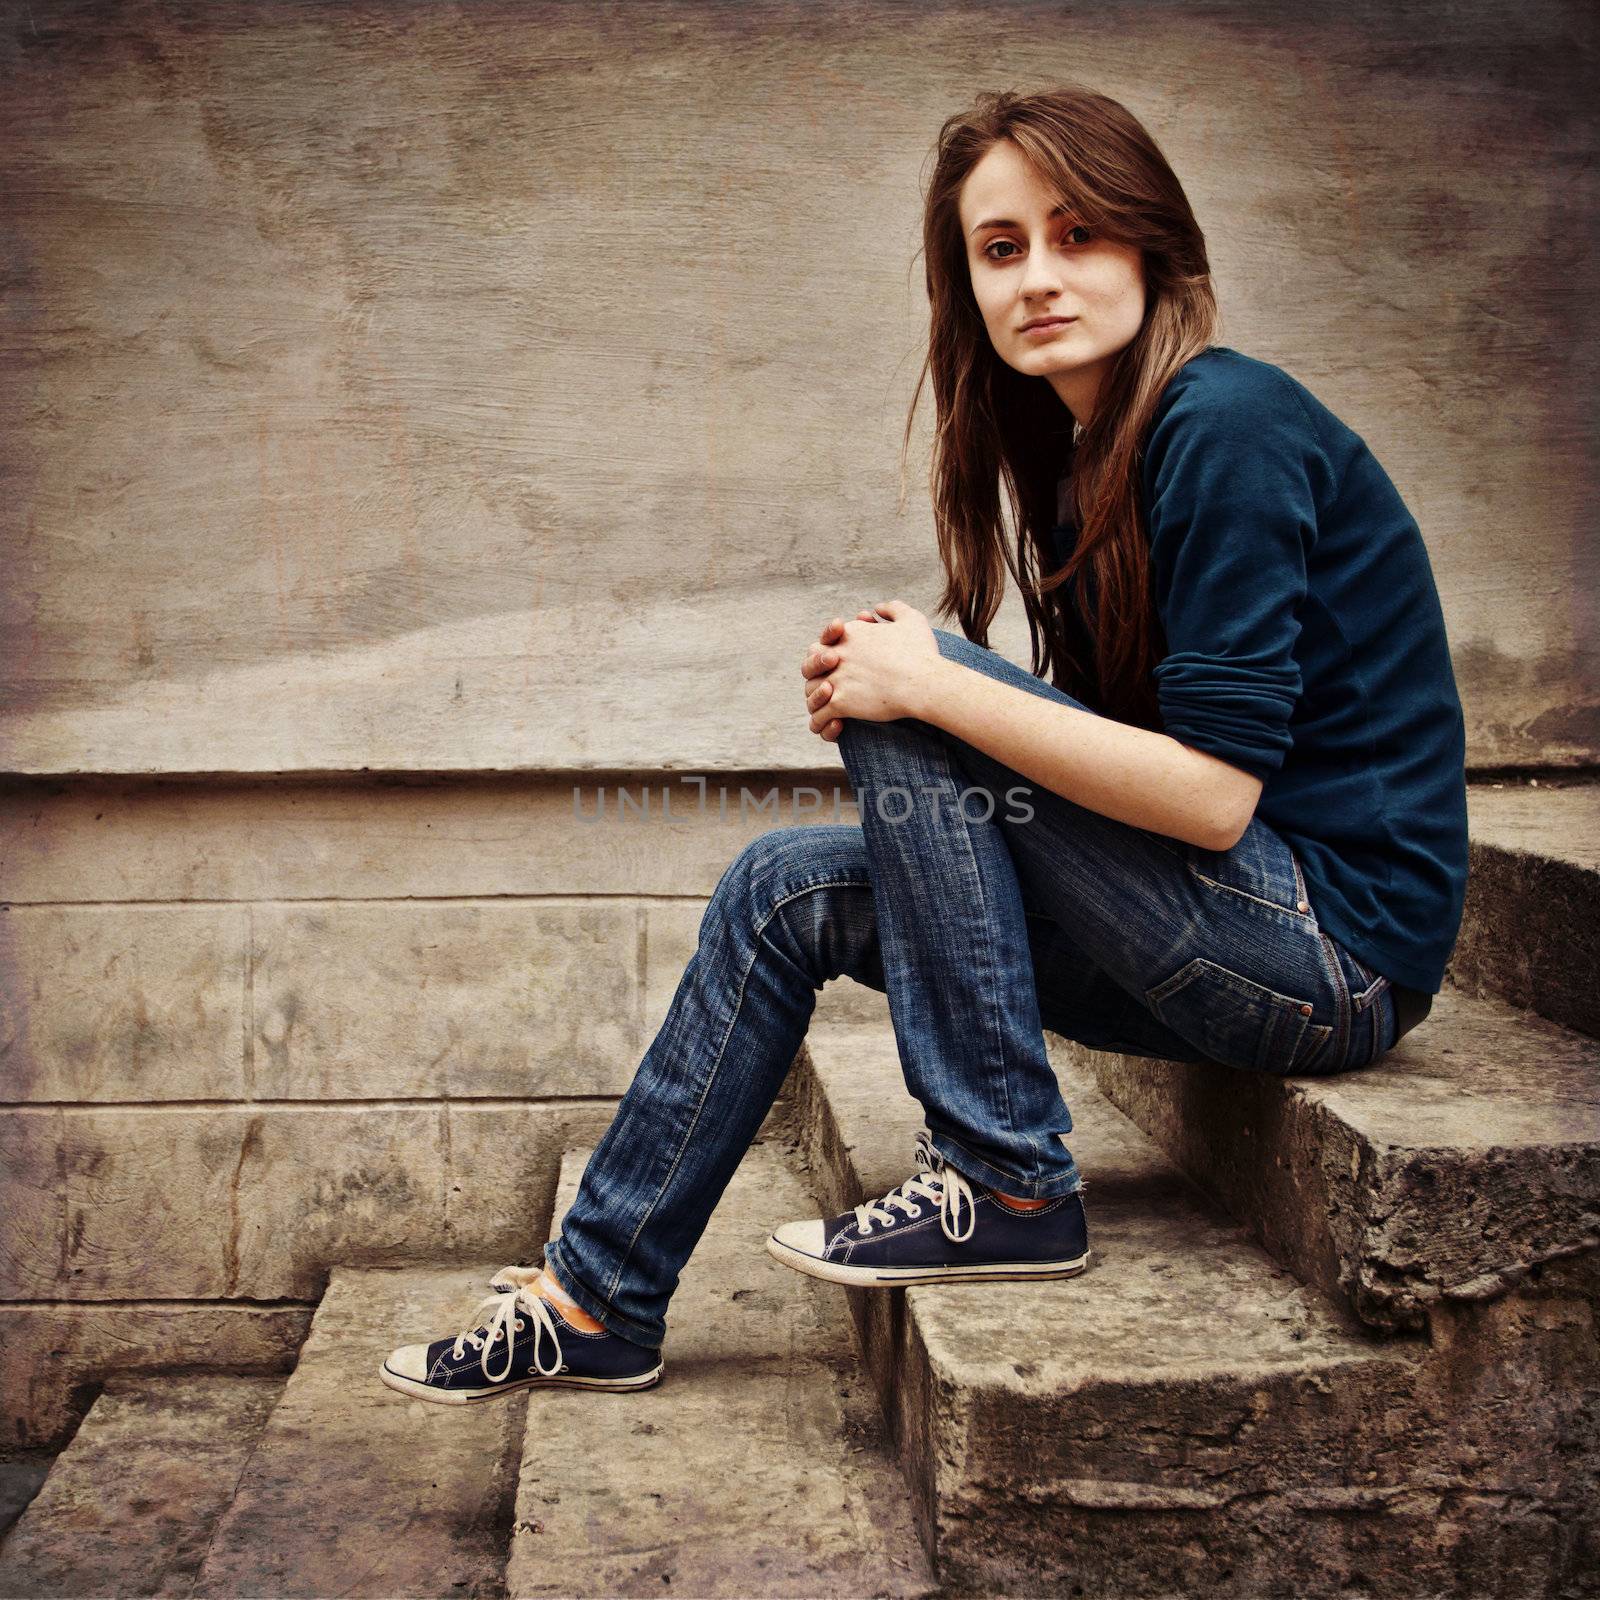 Teen girl sitting on stairs against grungy wall. square photo with grunge texture.